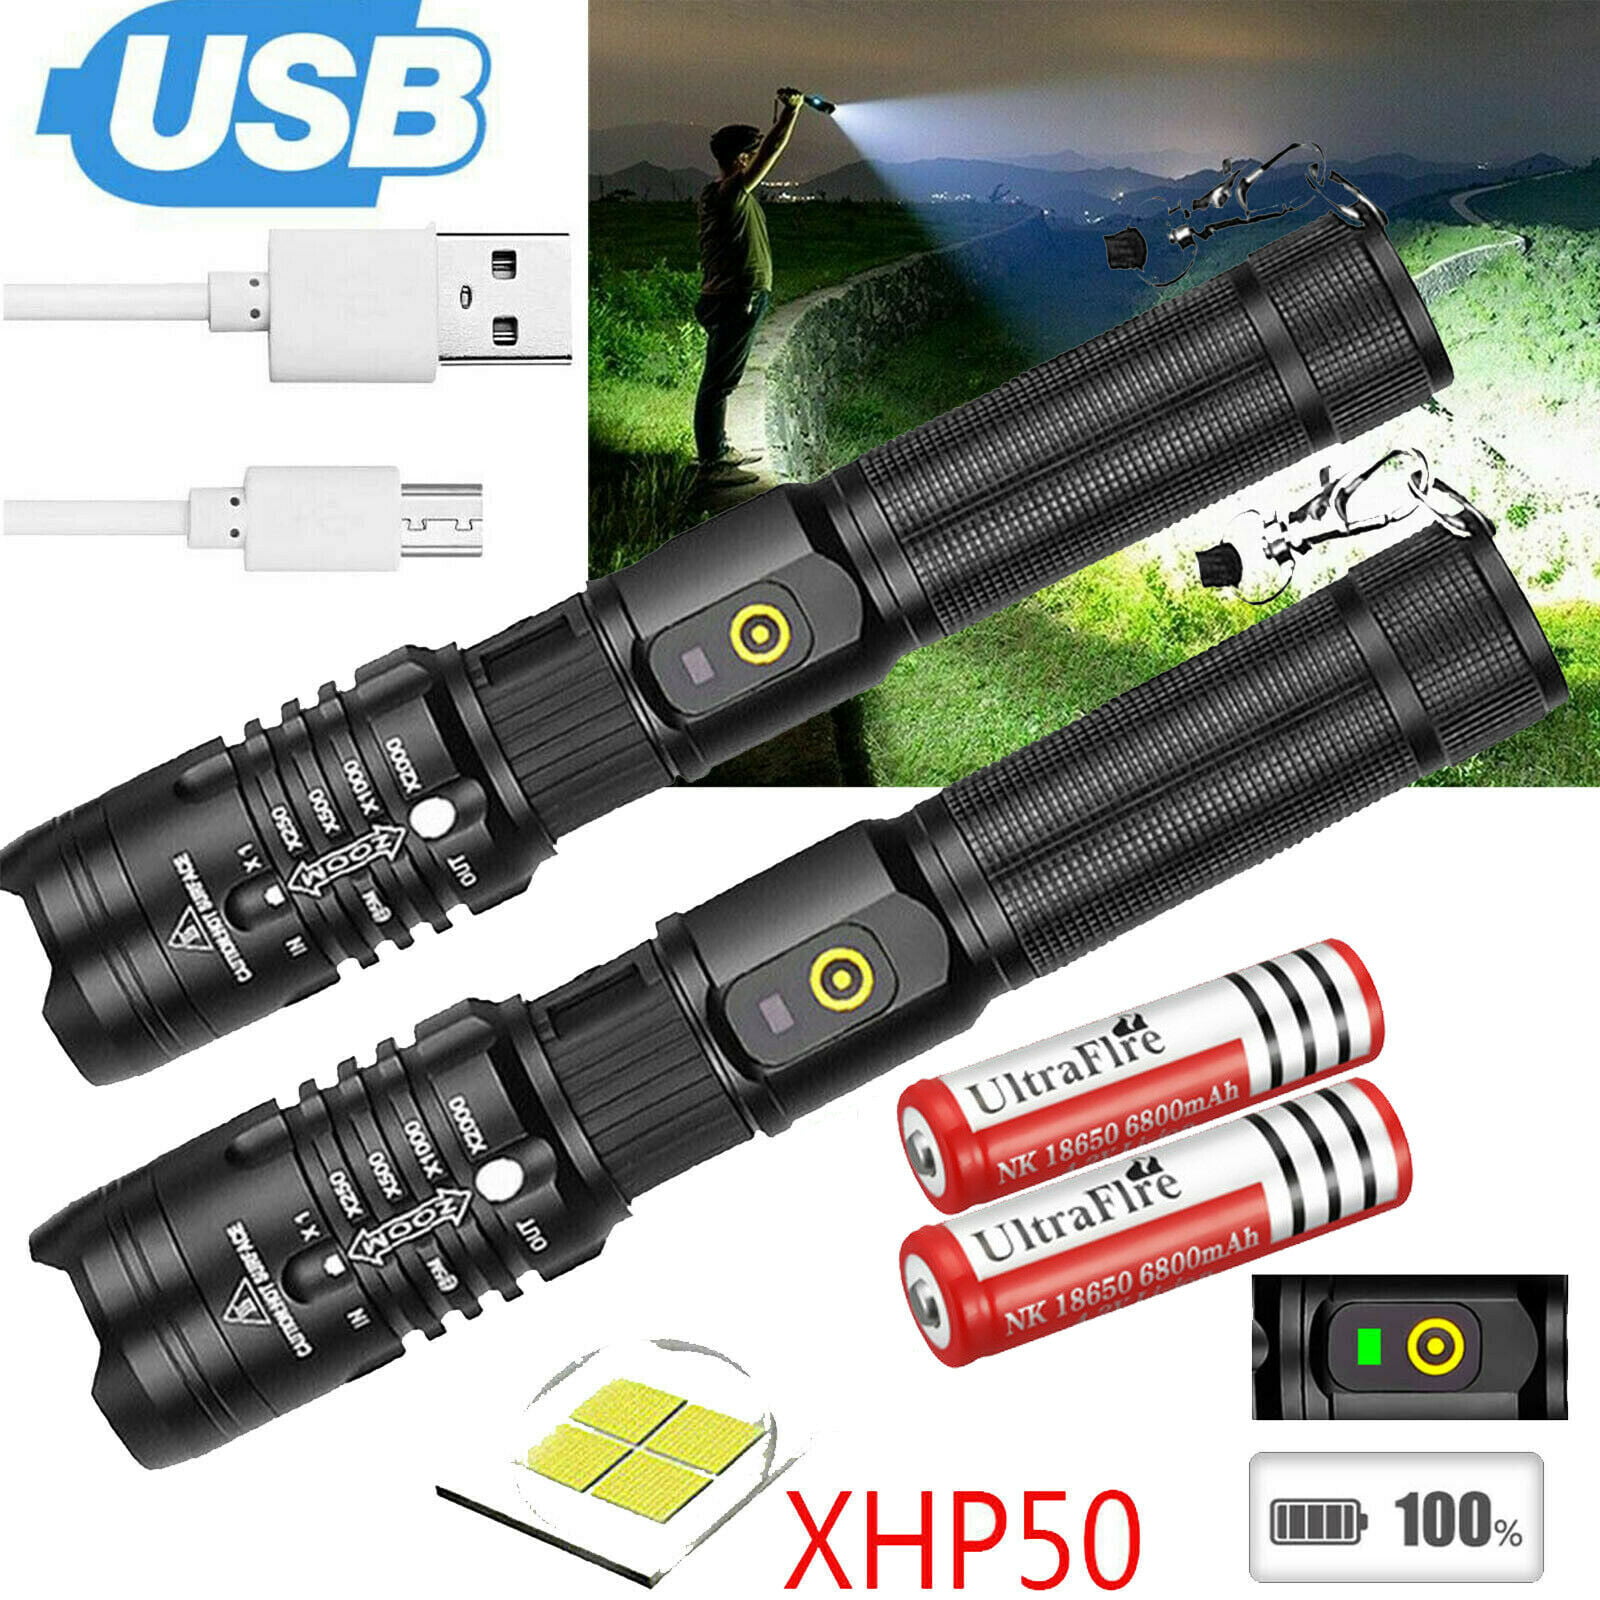 UltraFire 50000LM T6 LED 18650 Super Bright Zoom Flashlight Powerful Lamp Torch